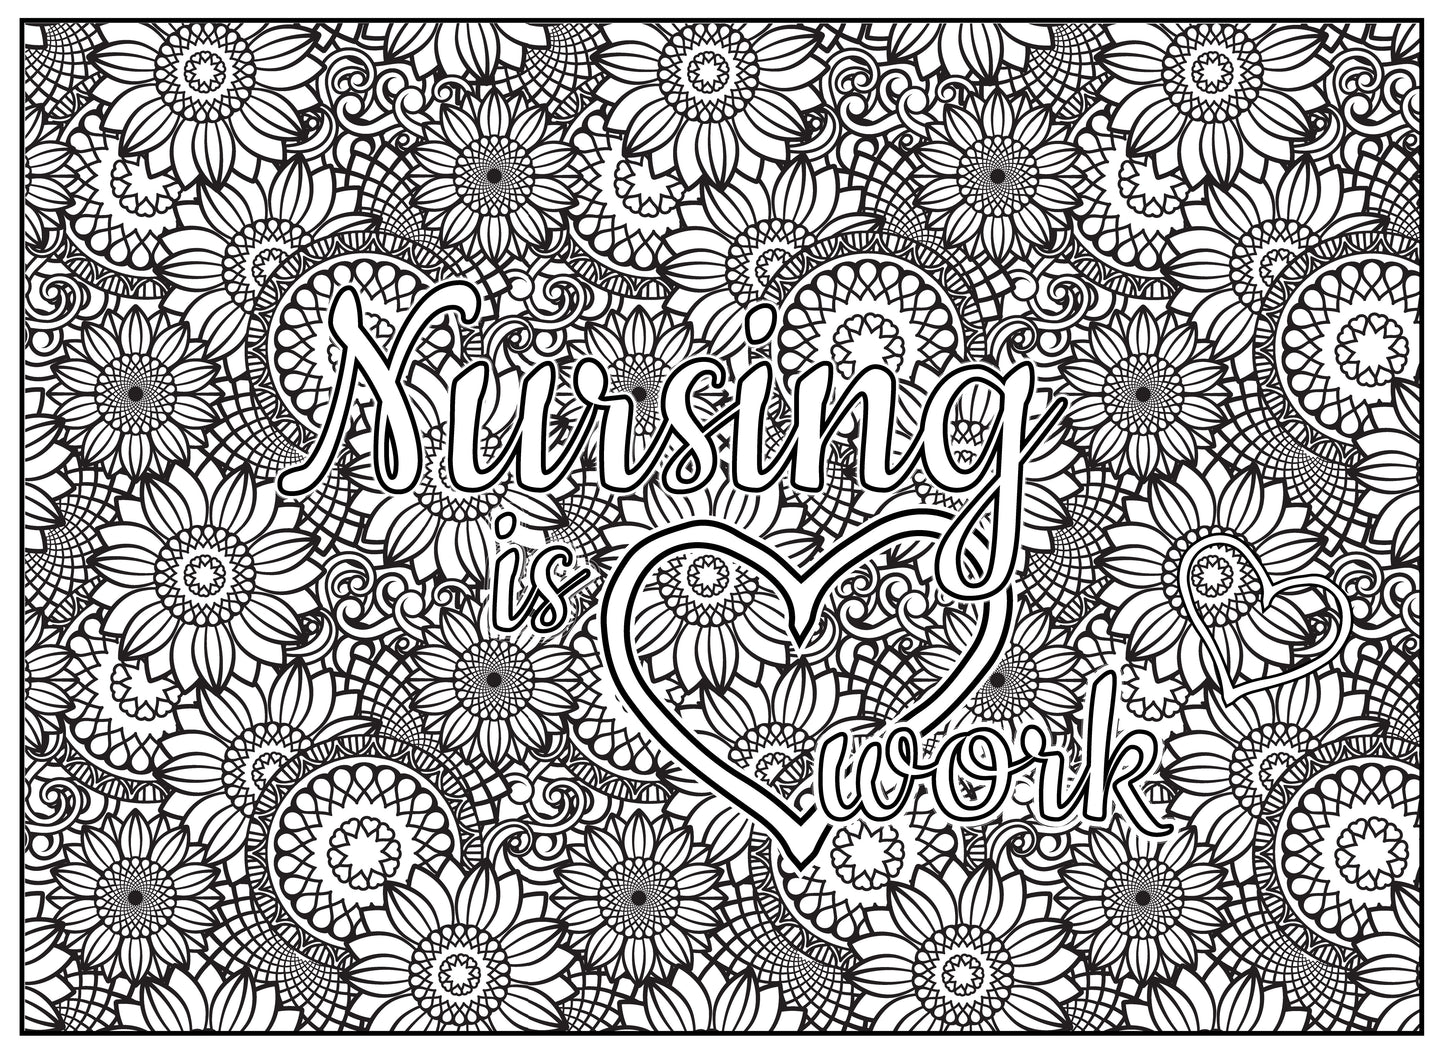 Nursing is Heart Work Personalized Giant Coloring Poster 46" x 60"